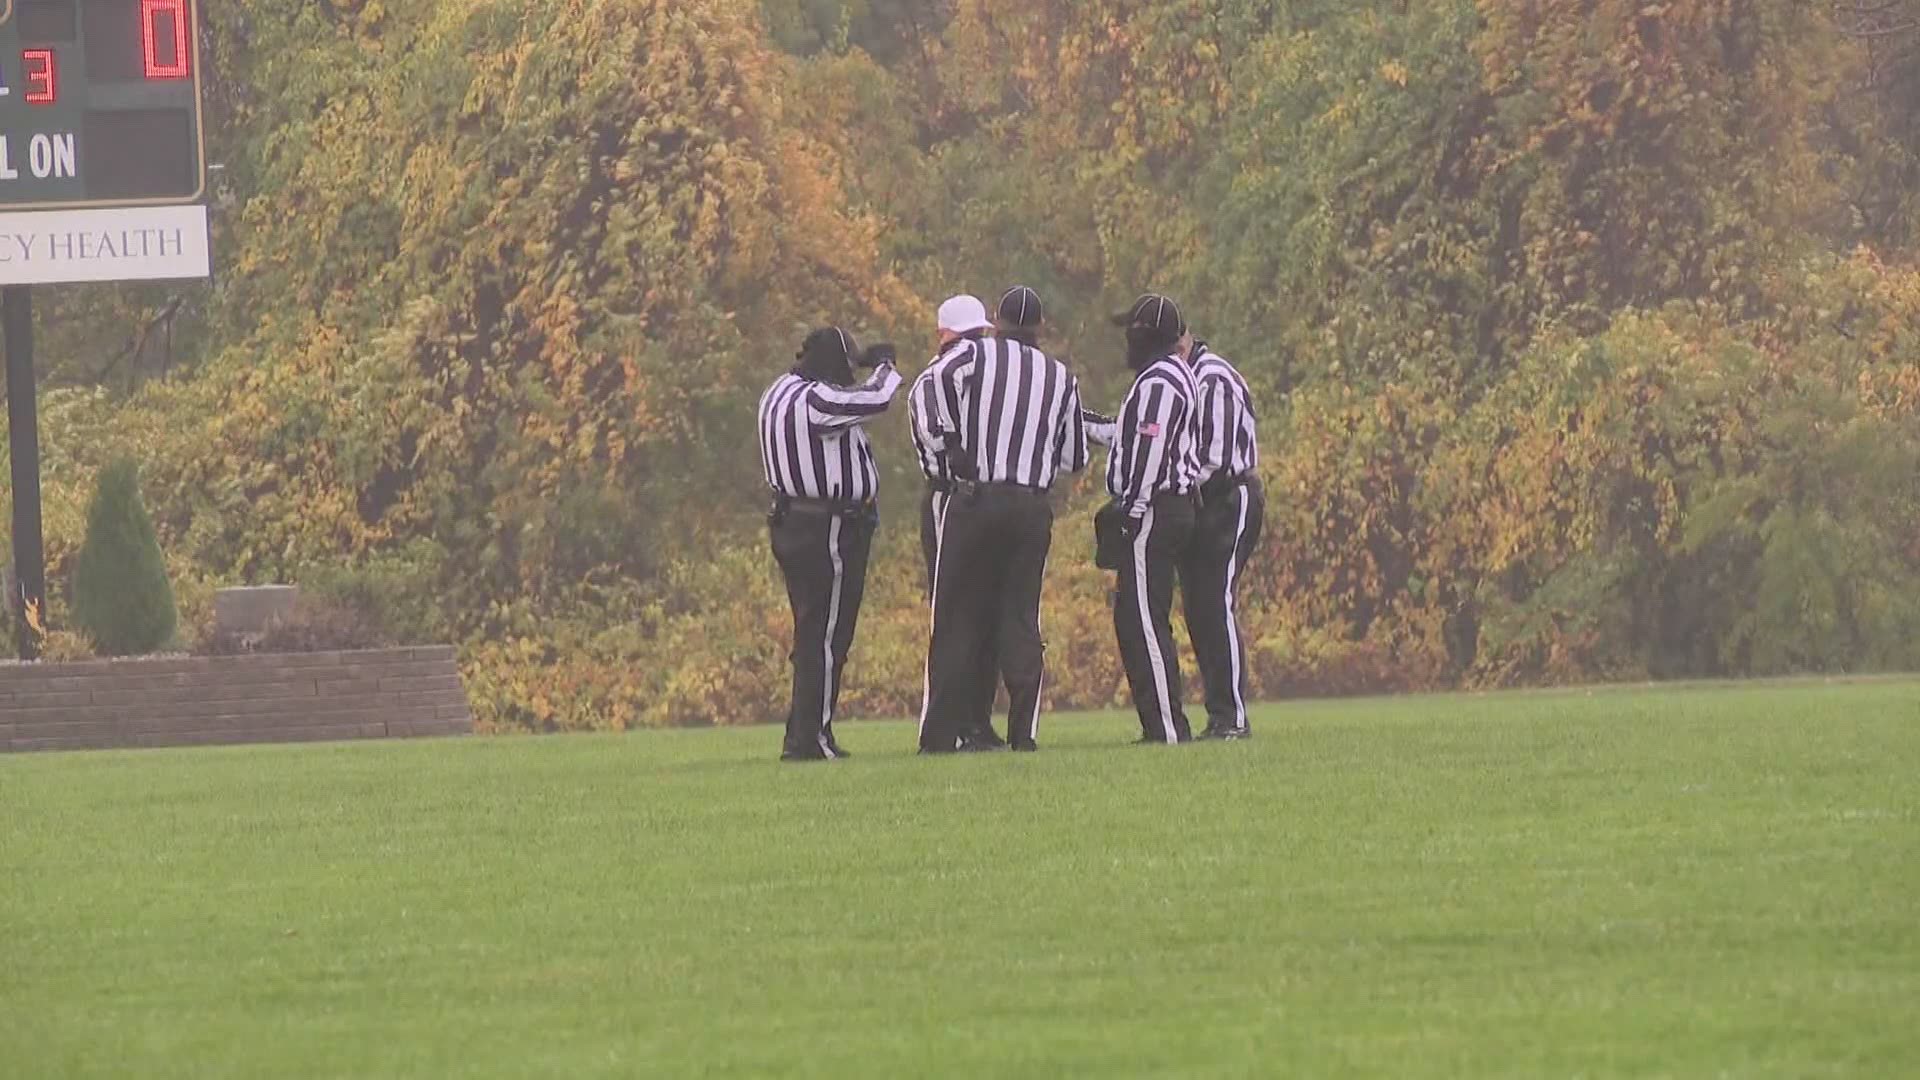 The game between Muskegon Catholic Central and Holton kicked off at 4:00 p.m Friday so the officiating crew could referee two games in one night.